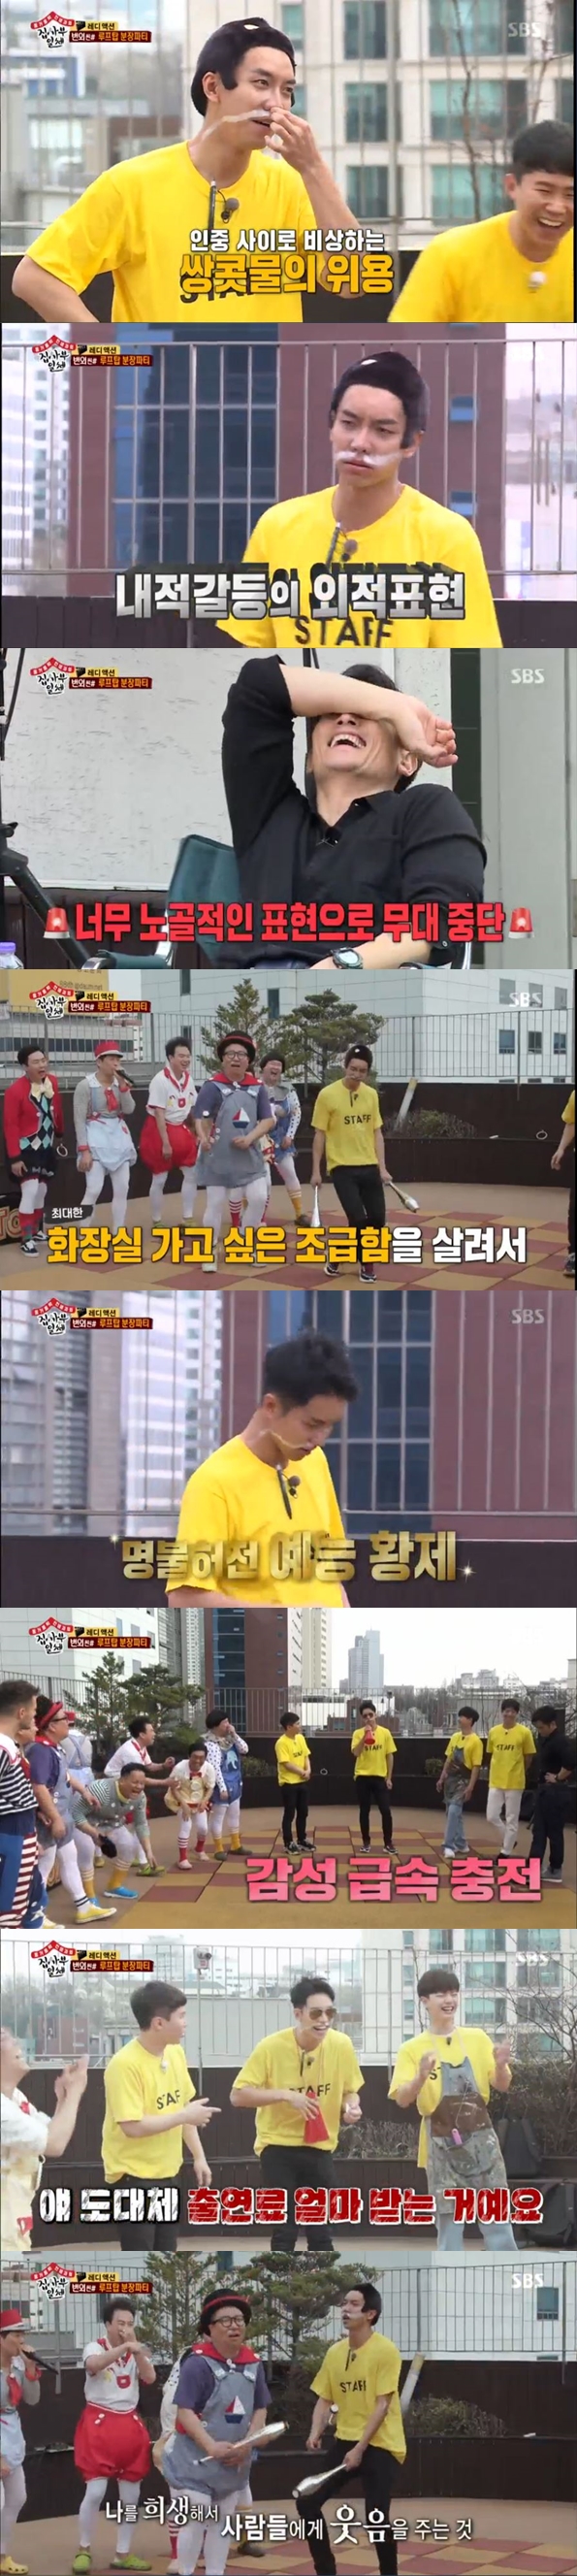 Lee Seung-gi showed up as an assistant director and entertainer of Master Cha In-pyo. On SBS All The Butlers broadcasted at 6:30 pm on the 29th, members of the Super Unit Inscription Pictures production process was performed with Master Cha In-pyo.Cha In-pyo, who last week named Lee Seung-gi as assistant director, continued to find Lee Seung-gi in the dressing room work.You have to help with the work, said the designer, who was a visiting designer in Hollywood to make better works.Cha In-pyo said, This person should not be my left arm, but use the other three. Lee Seung-gi saved the envy of the members. Yang Se-hyeong dreamed of being promoted as assistant director but was in a position to deliver rice.I could change my assistant director, he asked Cha In-pyo, who favored Lee Seung-gi.Cha In-pyo said, You can do that anytime. He raised the expectation of Yang Se-hyeong, but Yang Se-hyeongs skills in costume work have fallen a long time.Cha In-pyo told Yang Se-hyeong, I think you should buy rice because it is time to eat soon. Cha In-pyos super unit plan continued during the meal.Lee Sang-yoon and Yang Se-hyeong, who went to buy rice, were surprised to hear the staff who went together, saying, Its not more than 10,000 won, and we have to hurry.Yang Se-hyeong complained, What is the rule? But he followed. When he ate rice, Cha In-pyos cell phone alarm sounded.He said, Its time to bend and spread. He ordered the members to push up 50 push-ups on time according to the plan. The members followed the masters plan but tongued out.Yang Se-hyeong laughed, saying, I can not fully understand the meaning of the master yet. The full-scale shooting began and the members were surprised again when they saw the main character, Ong Als.Cha In-pyo documentary heroine Ongals showed a rehearsing of the performance in front of the members, reminiscent of a real performance.Ive never seen such a performance before, said Yoo Sung-gi, who admired them, saying, I think the Ongals are good at writing their faces, I want to learn them.